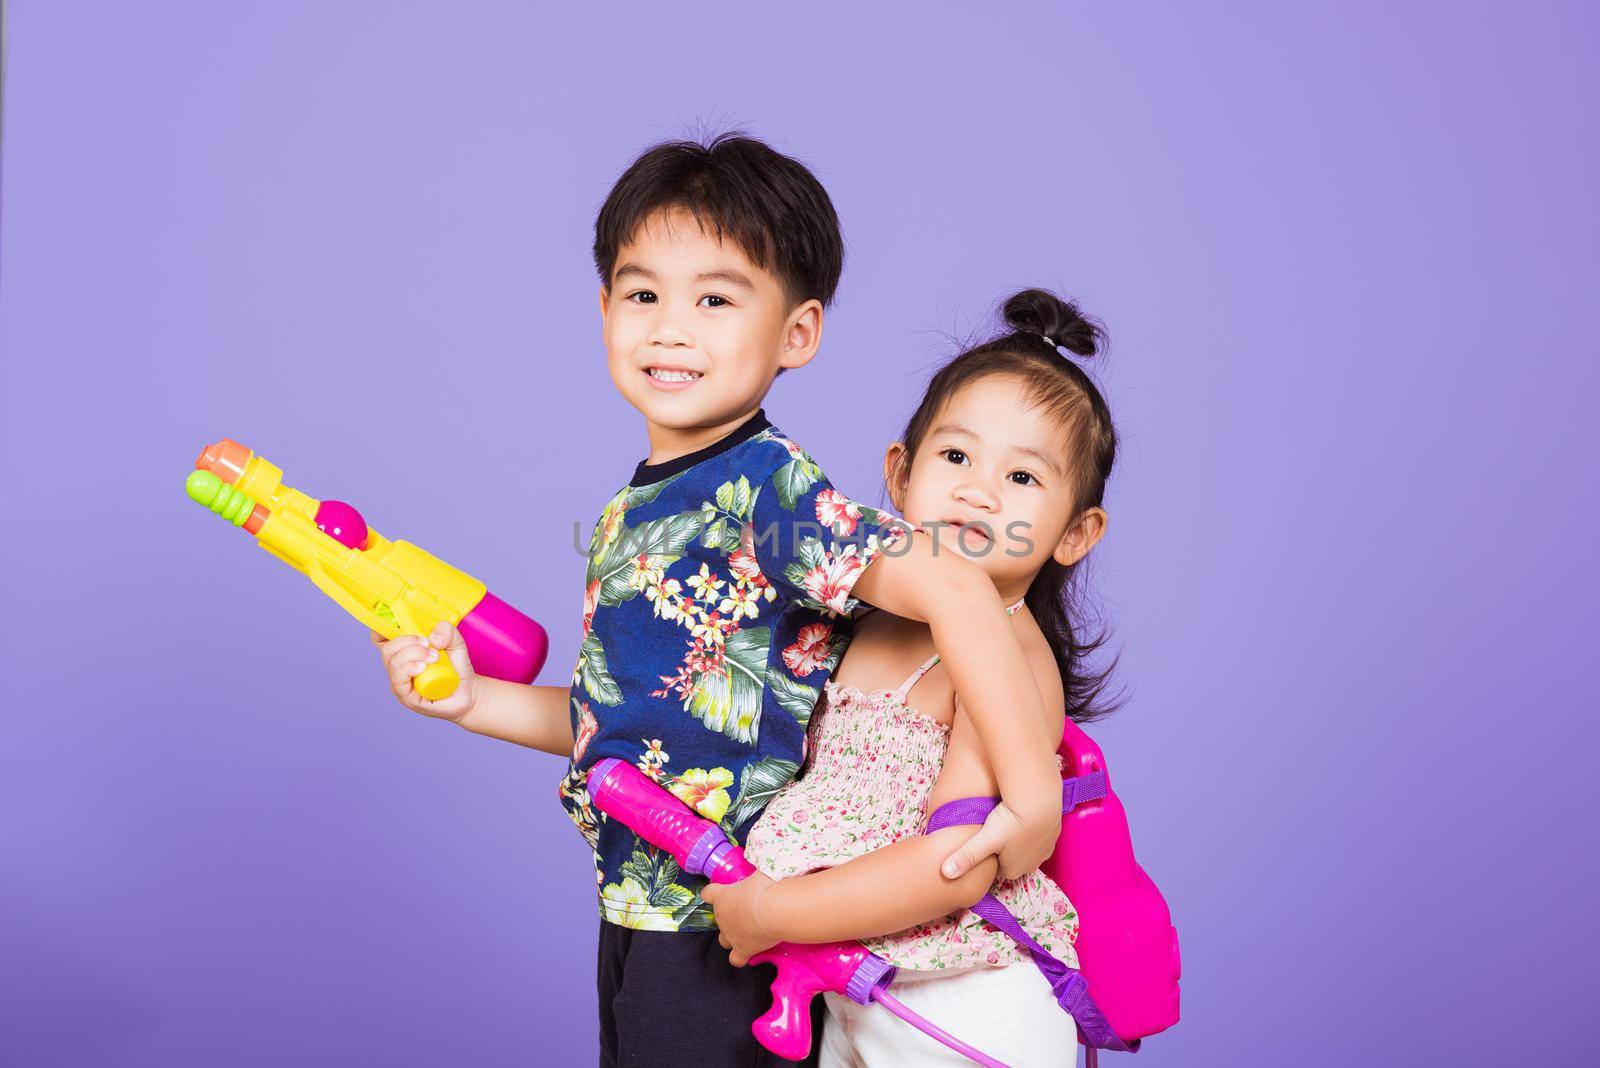 Two Happy Asian little boy and girl holding plastic water gun, Thai children funny hold toy water pistol and smile, studio shot isolated on purple background, Thailand Songkran festival day culture.